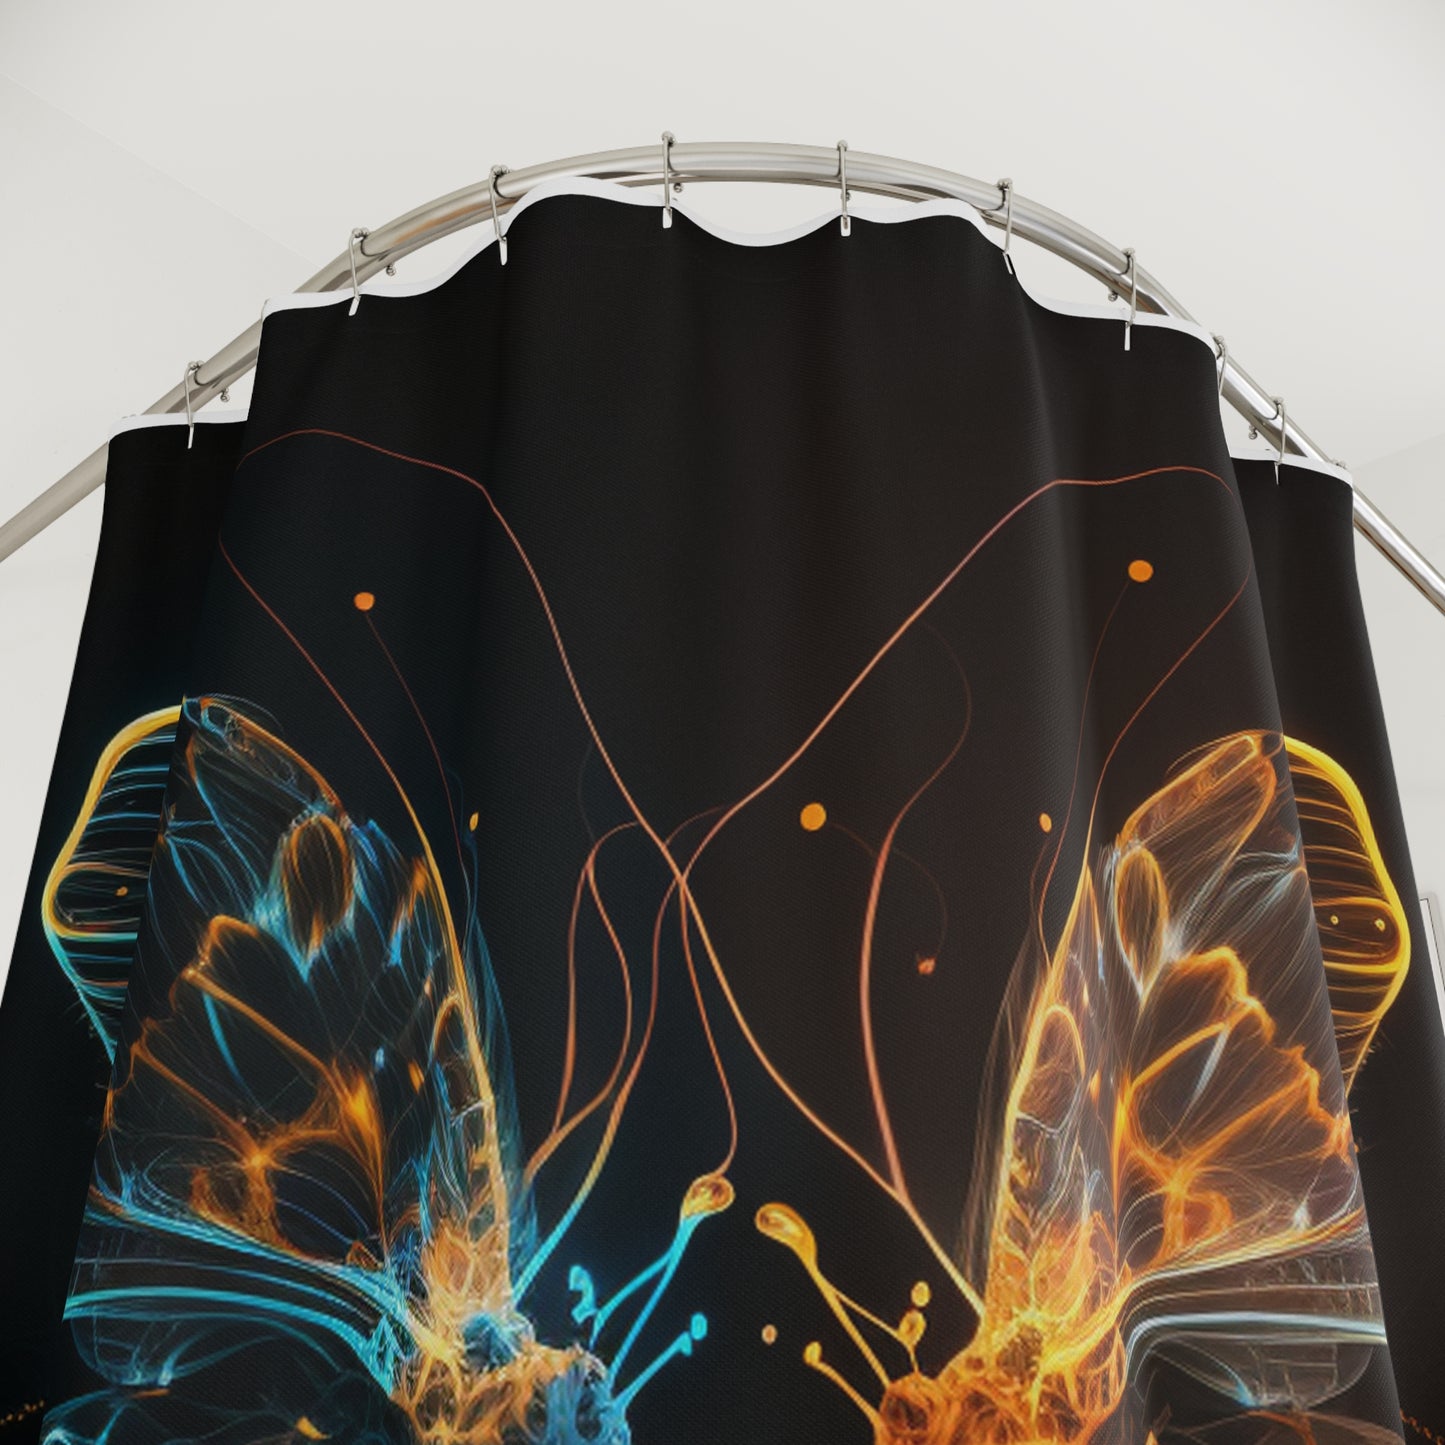 Polyester Shower Curtain Neon Glo Butterfly 1